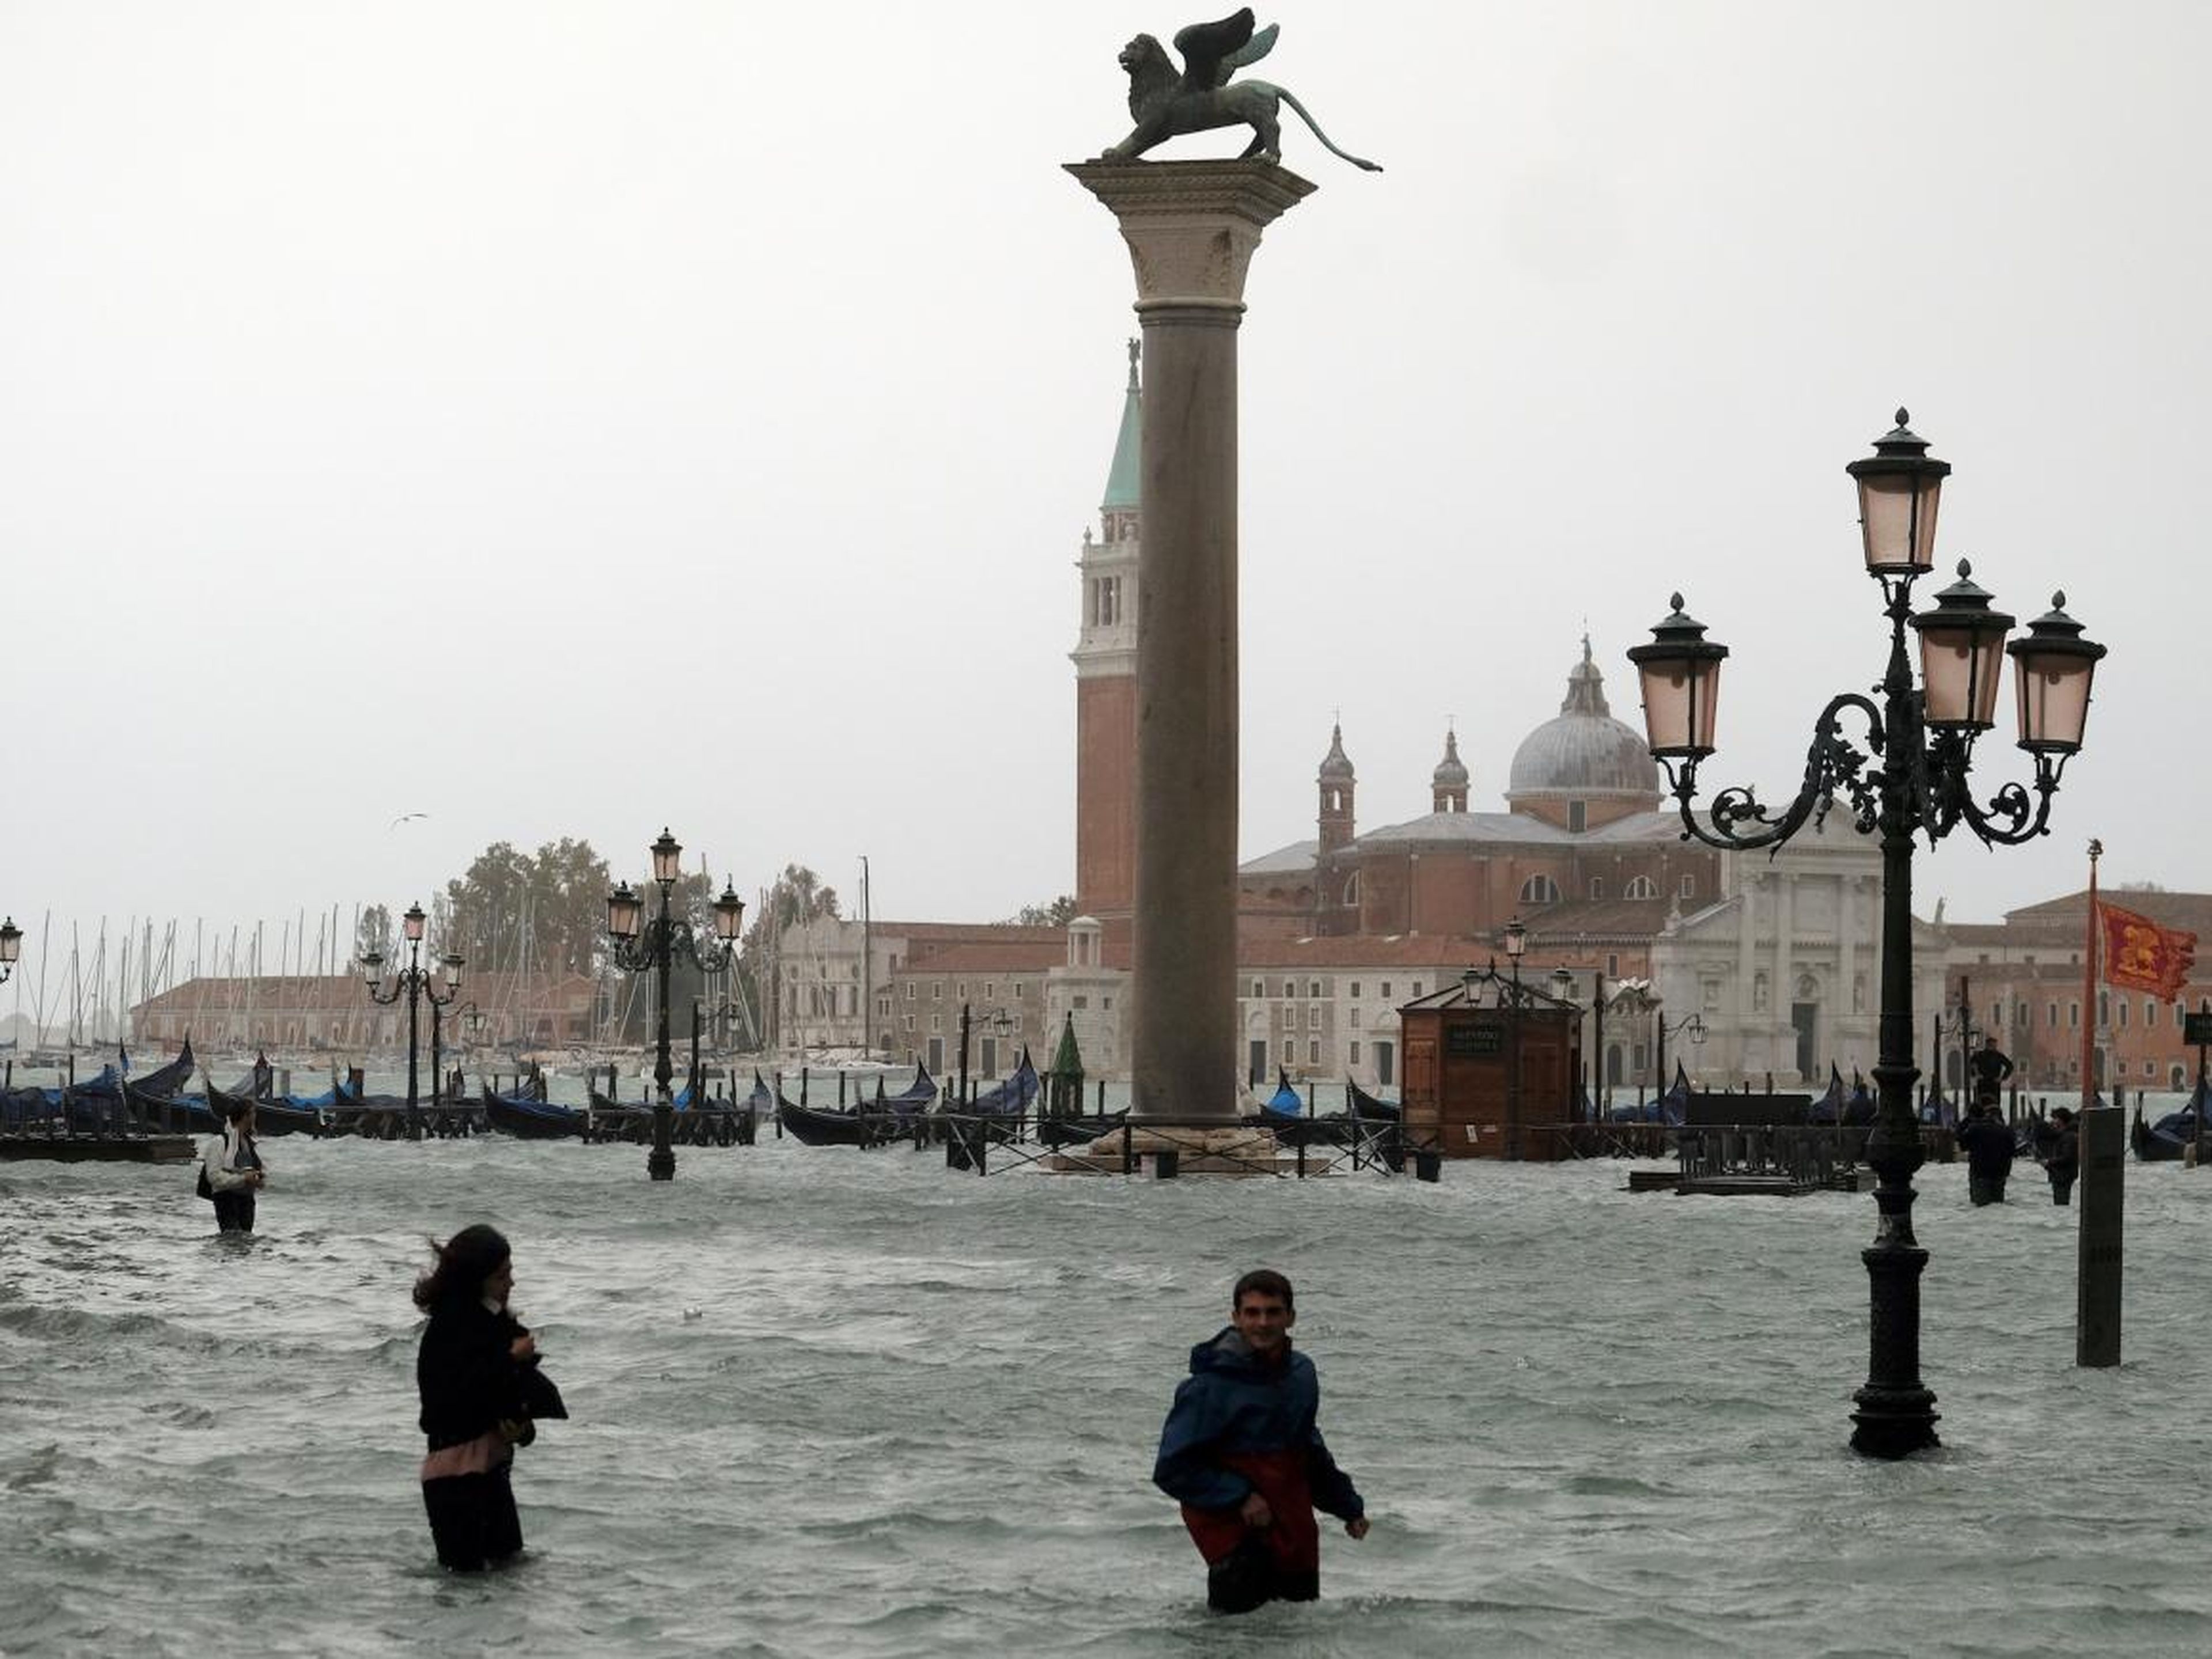 Venice frequently floods, but at the end of October 2018, Italy was hit by a series of intense storms that left three-quarters of Venice submerged. At least 11 people died in Italy in the country's worst flooding in a decade.